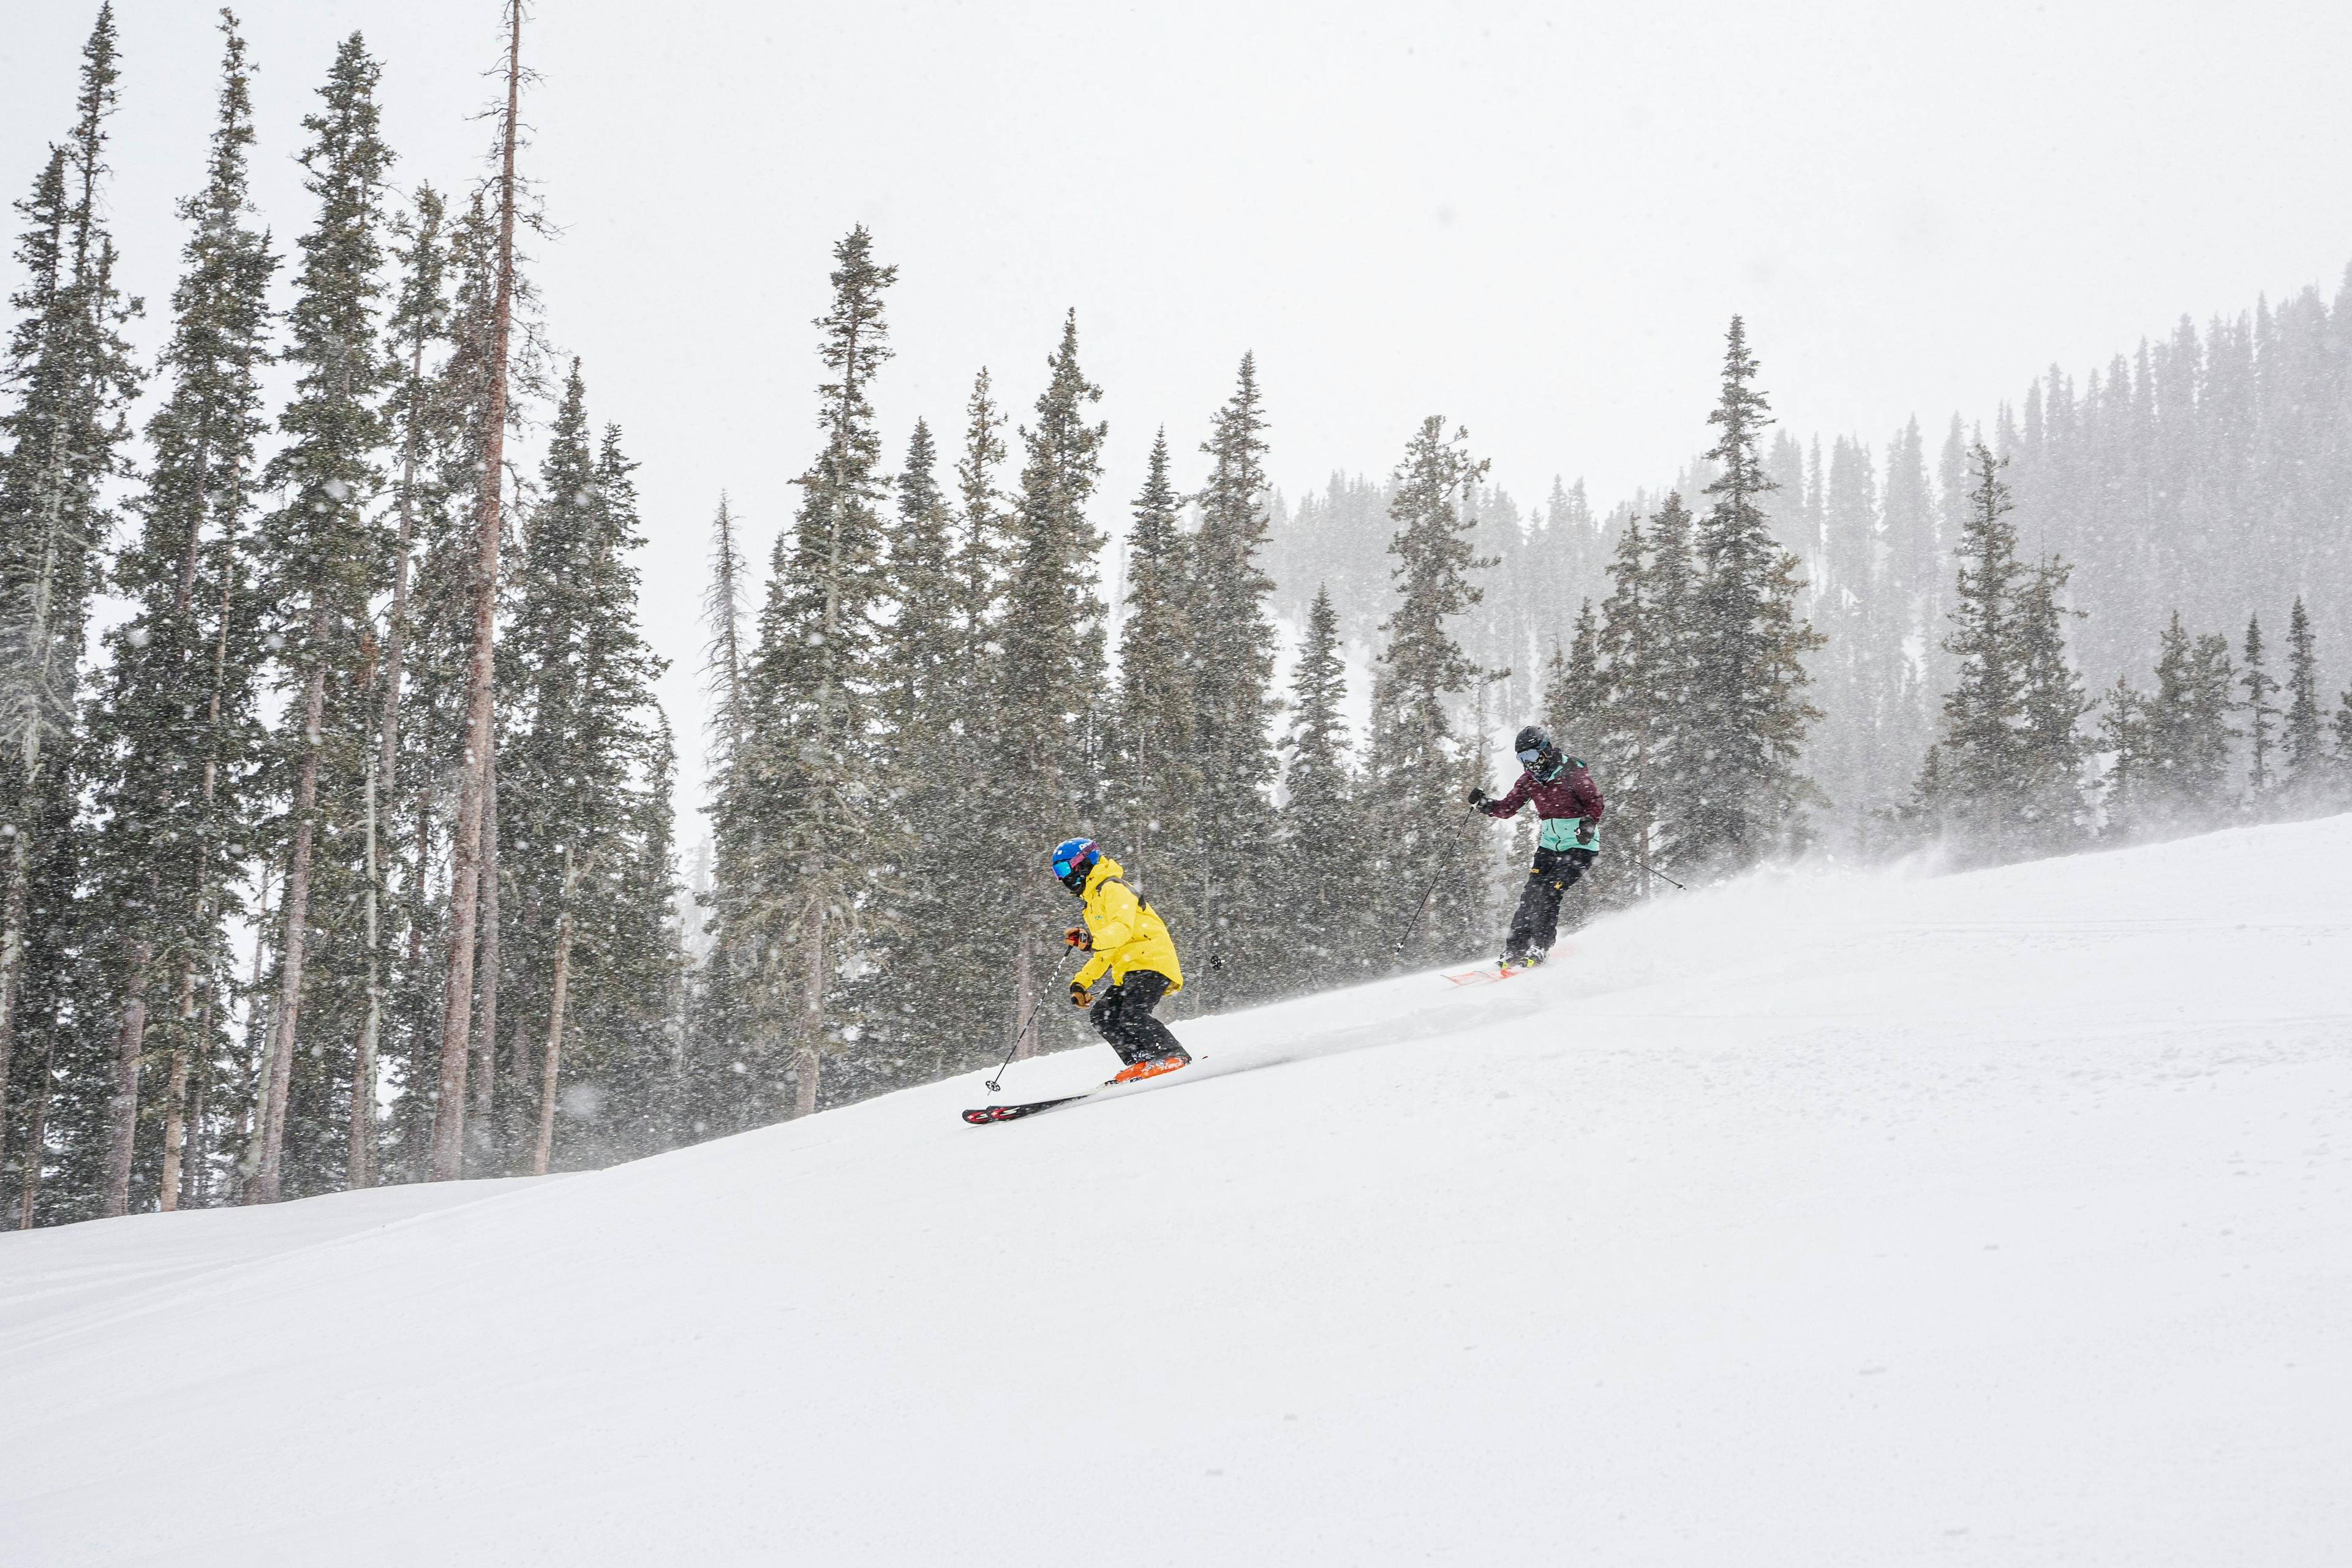 A skier and instructor heading down a run at Taos Ski valley.